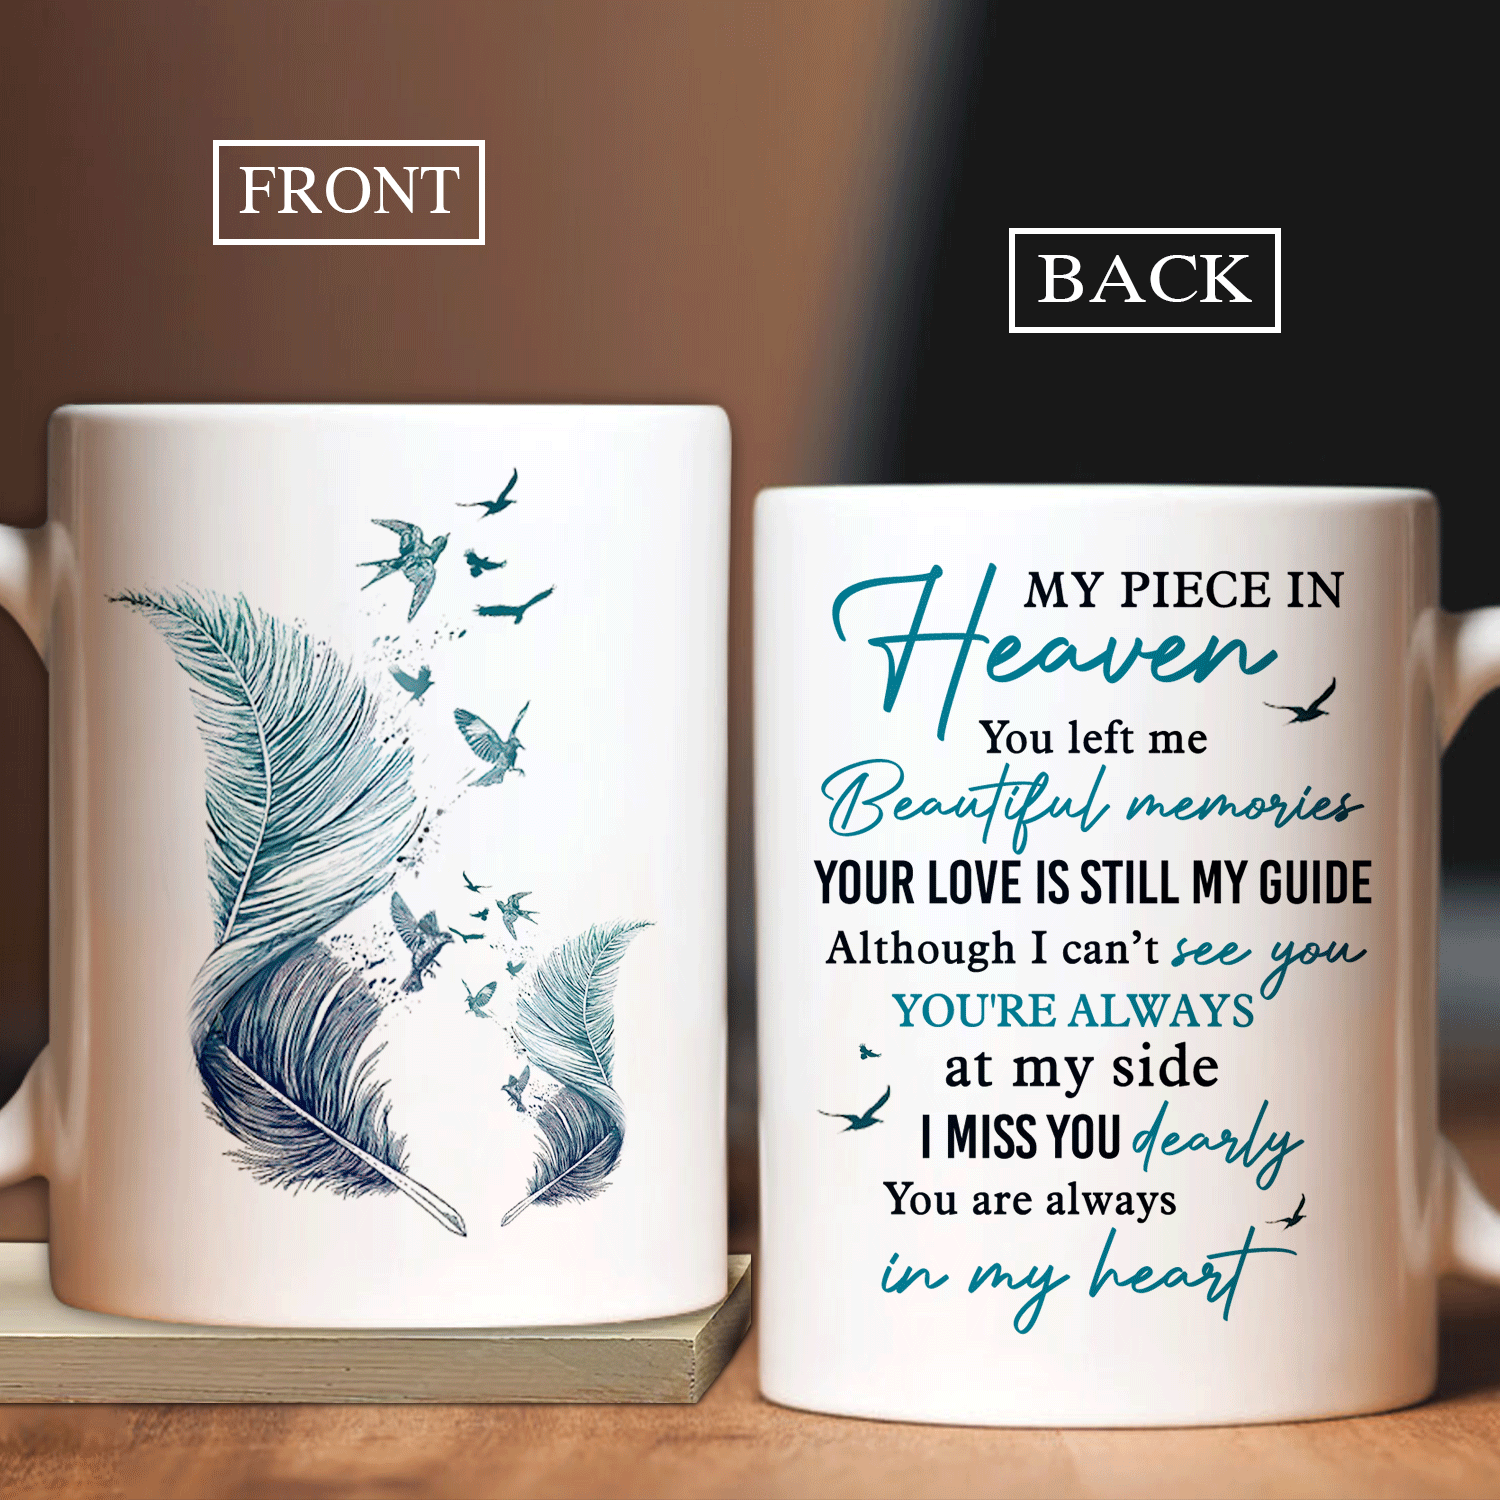 Memorial White Mug - Blue feathers, Flying swallows - Gift For Member Family - You are always in my heart - Heaven White Mug